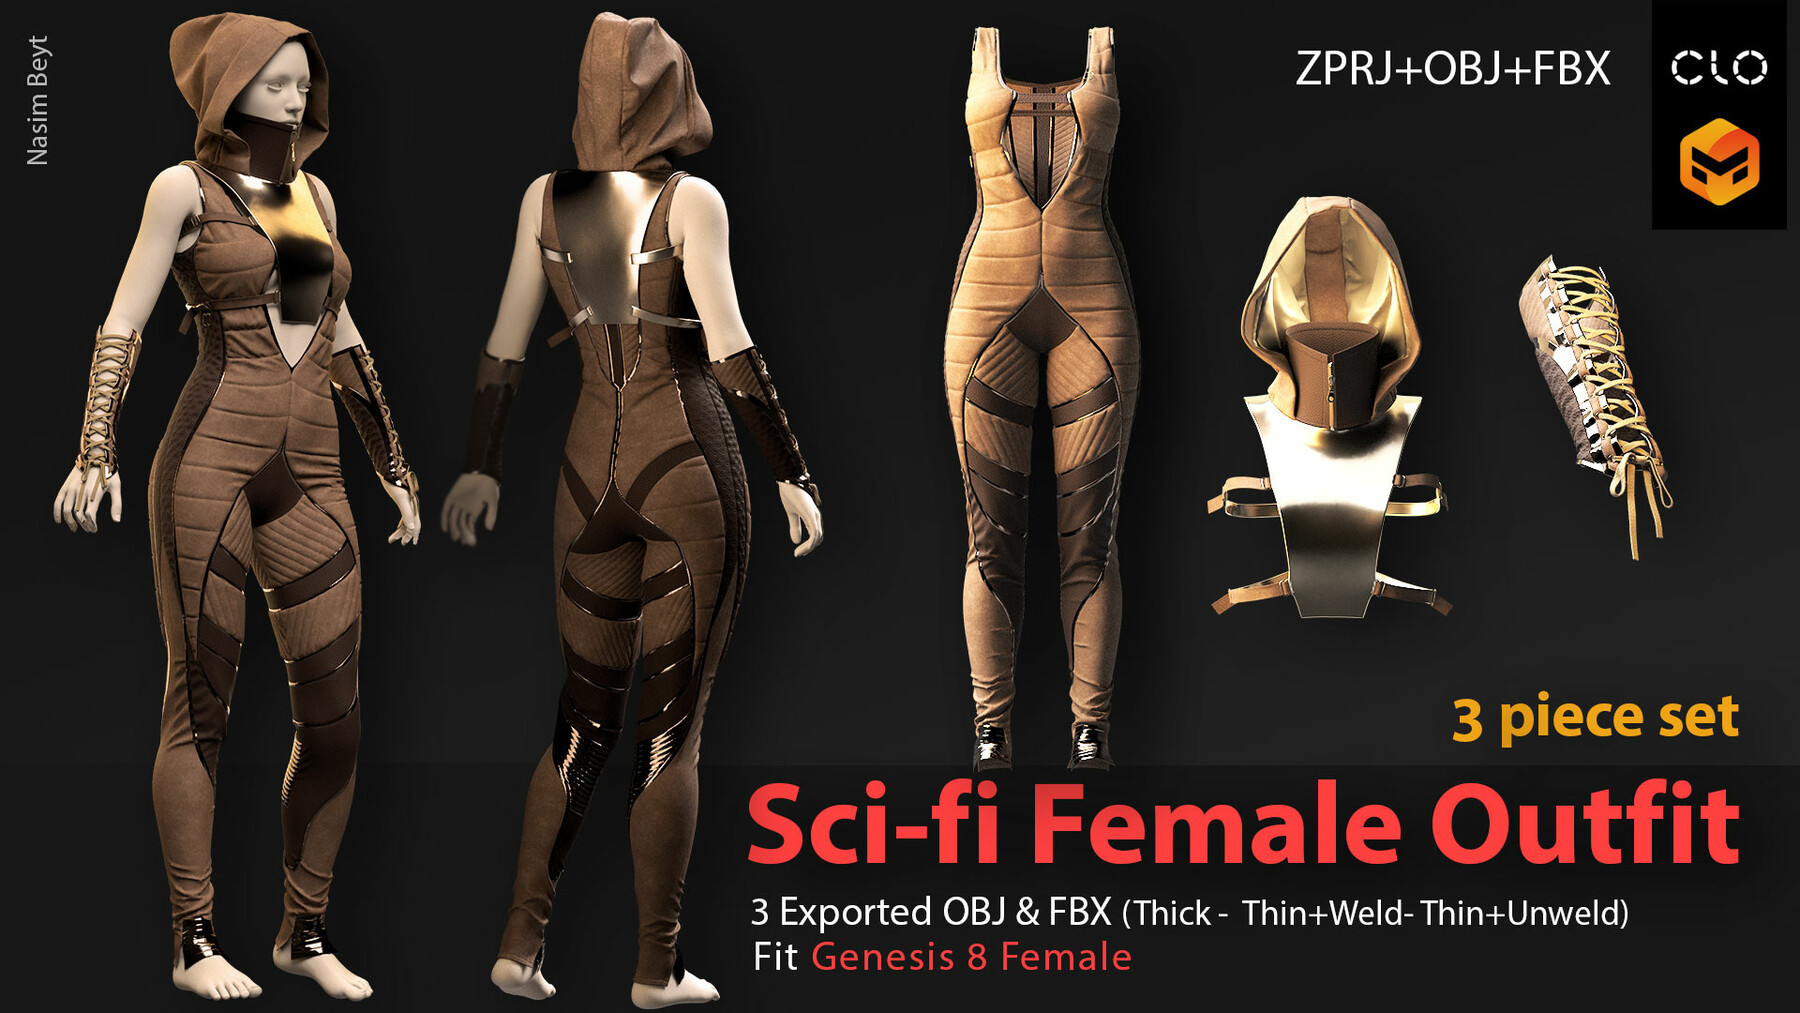 Cyberpunk Clothing & Outfits for Women